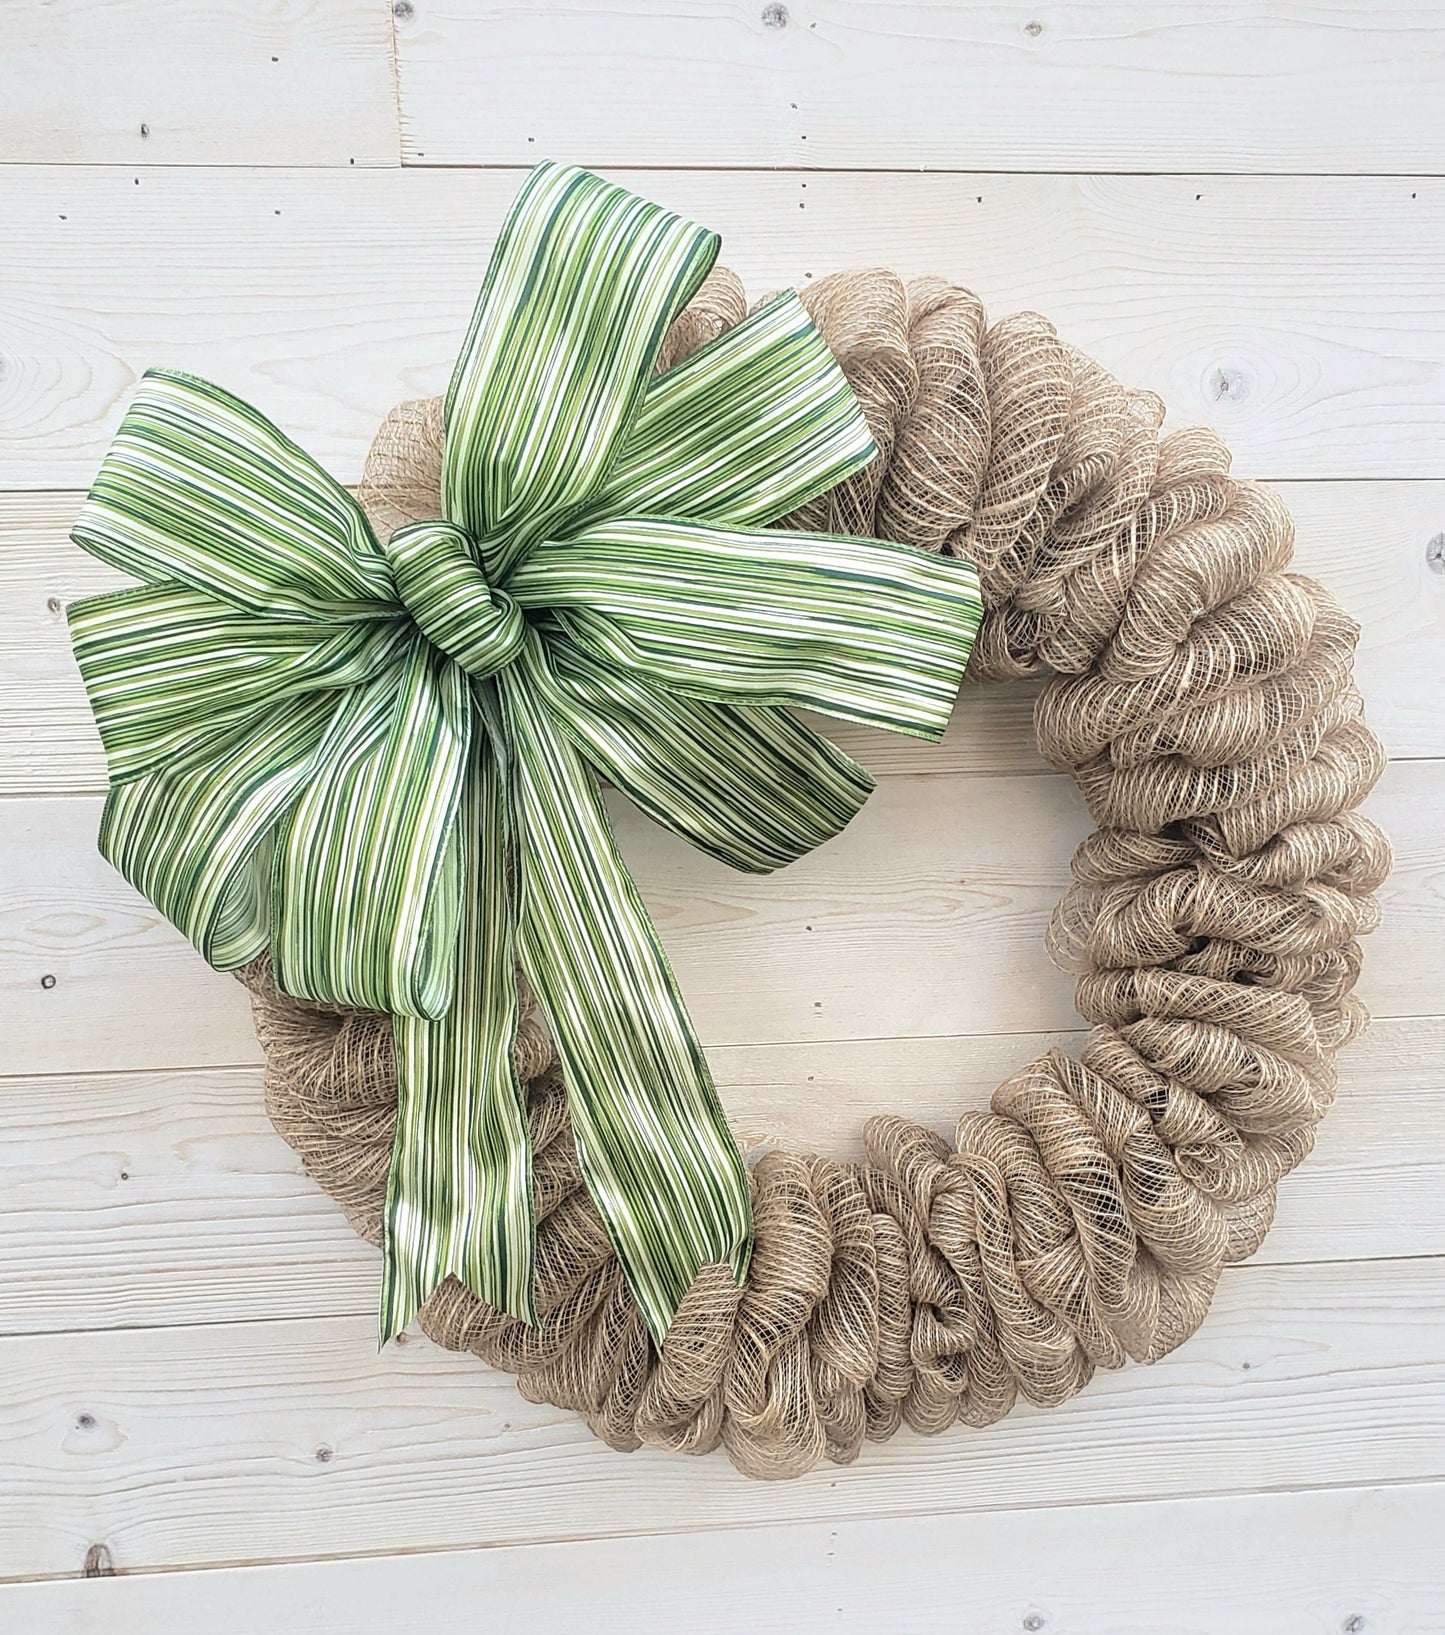 Farmhouse Style Deco Mesh Wreath for gift or self, front view.